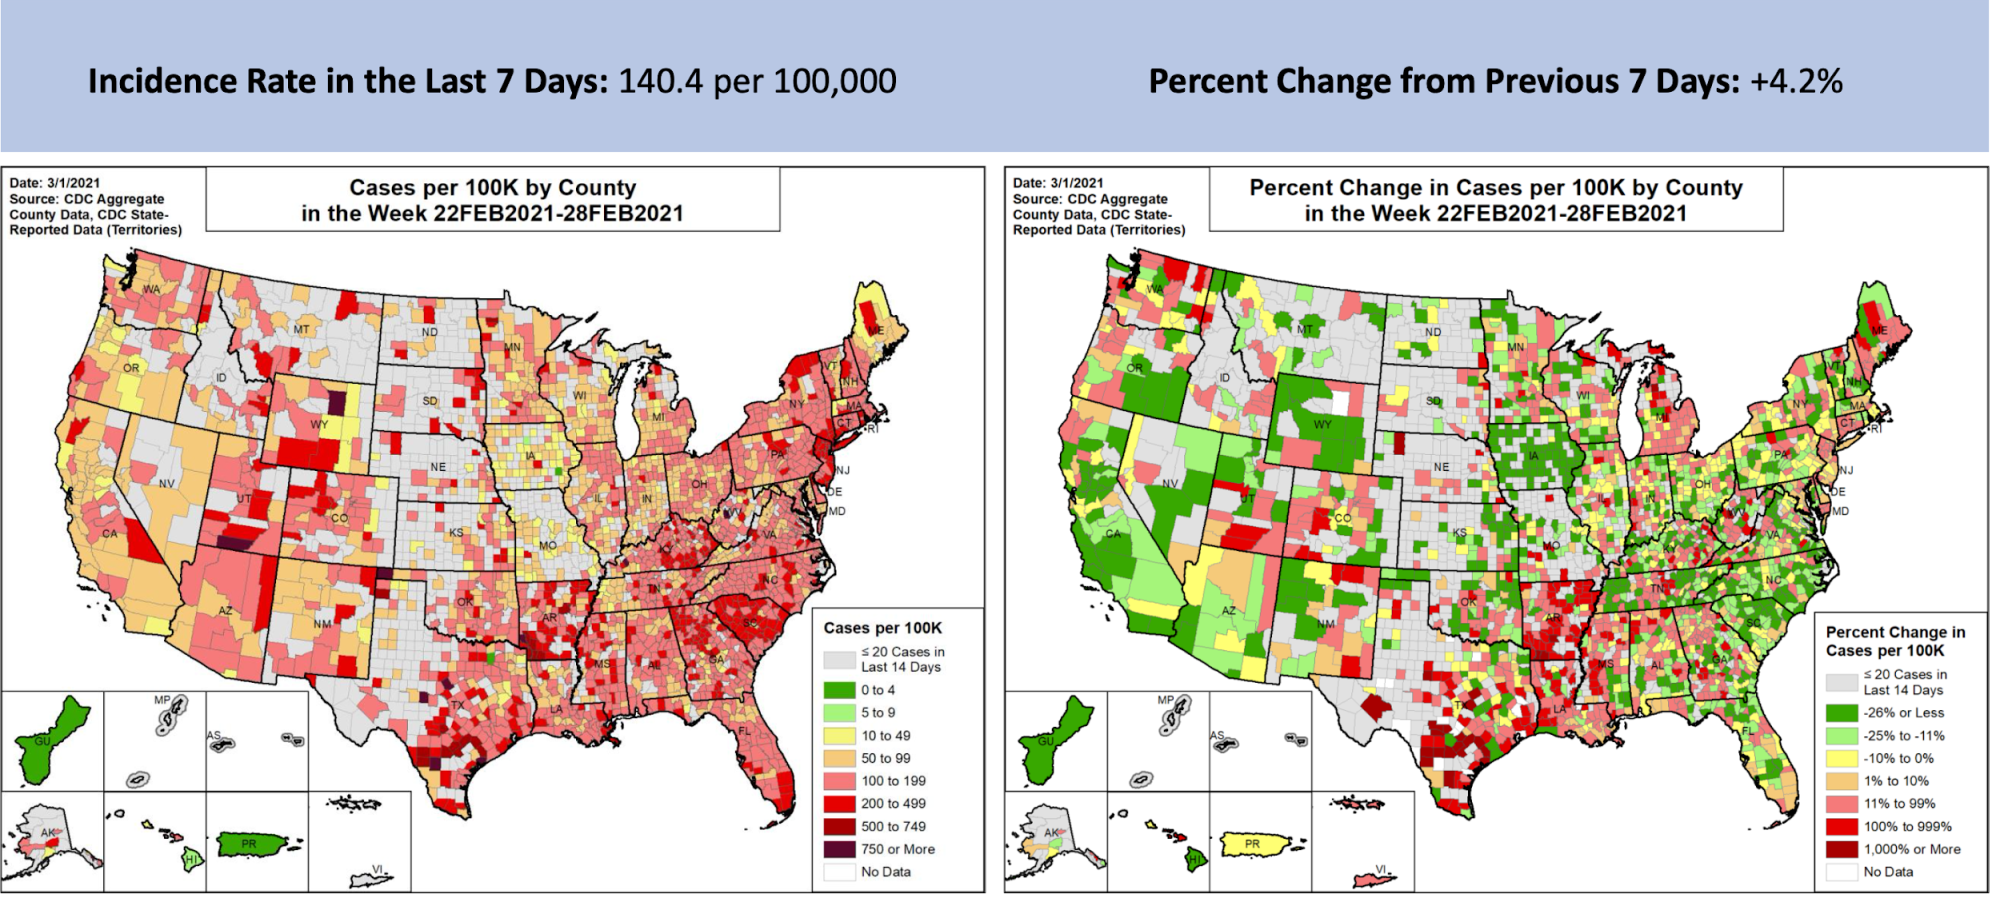 Two-panel data visualization from the CDC Community Profile Report showing side-by-side maps of the United States. The map on the left shows the 7-day incidence rate of COVID-19 cases in the US as 140.4 per 100,000 and the map on the right shows the percent change in COVID-19 cases per 100,000 people by county